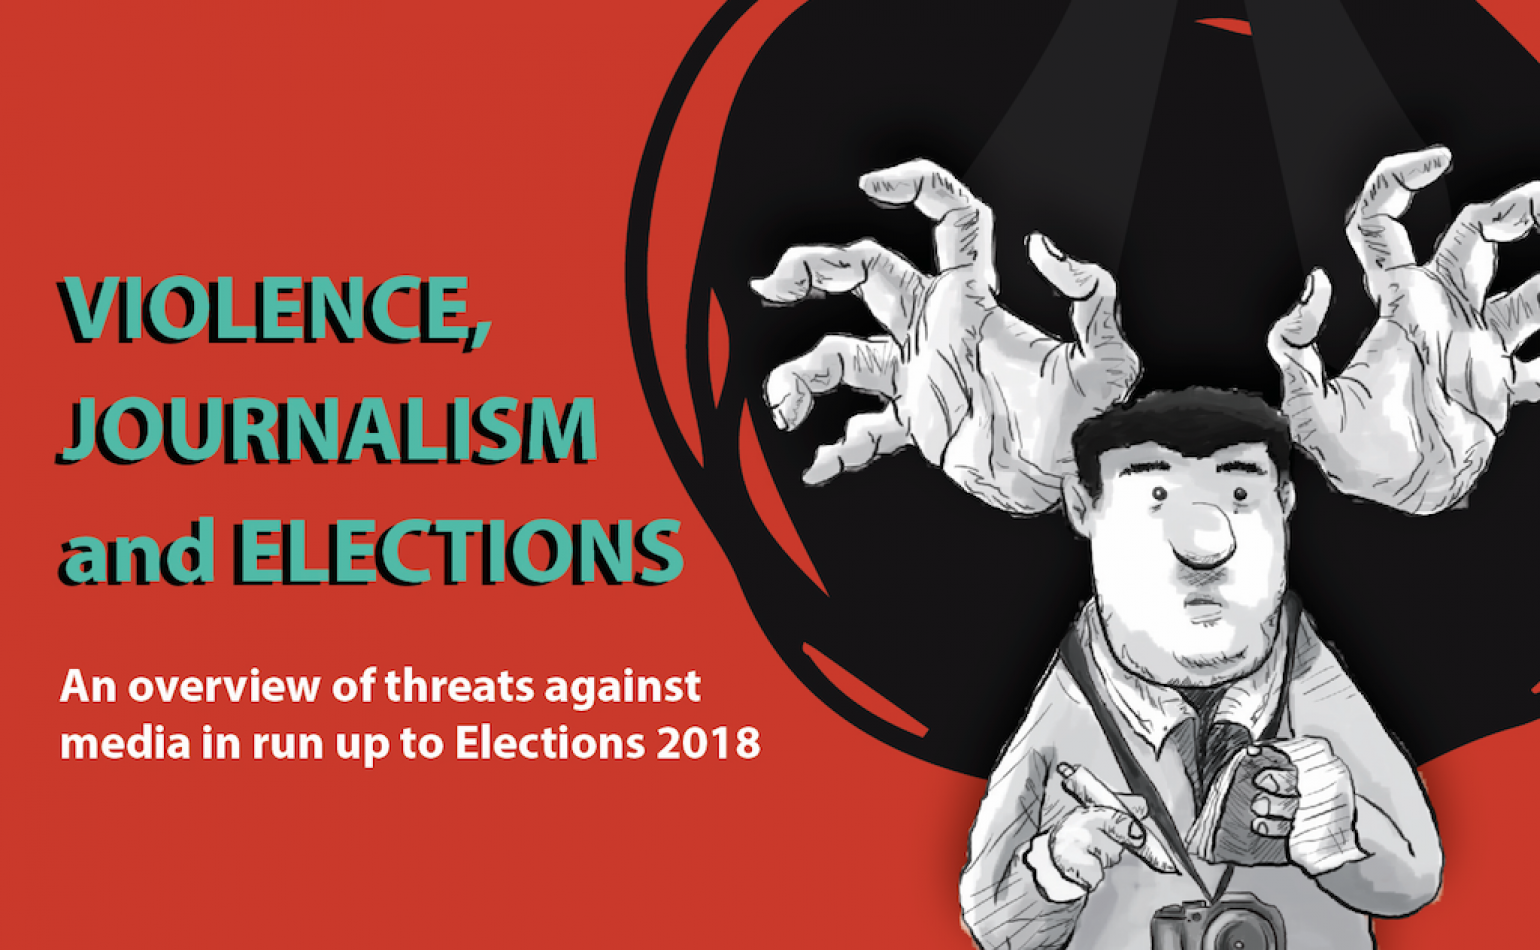 Violence, Journalism and Elections: A timeline of curbs on press freedom and attacks on journalists in Pakistan in the run-up to General Elections 2018